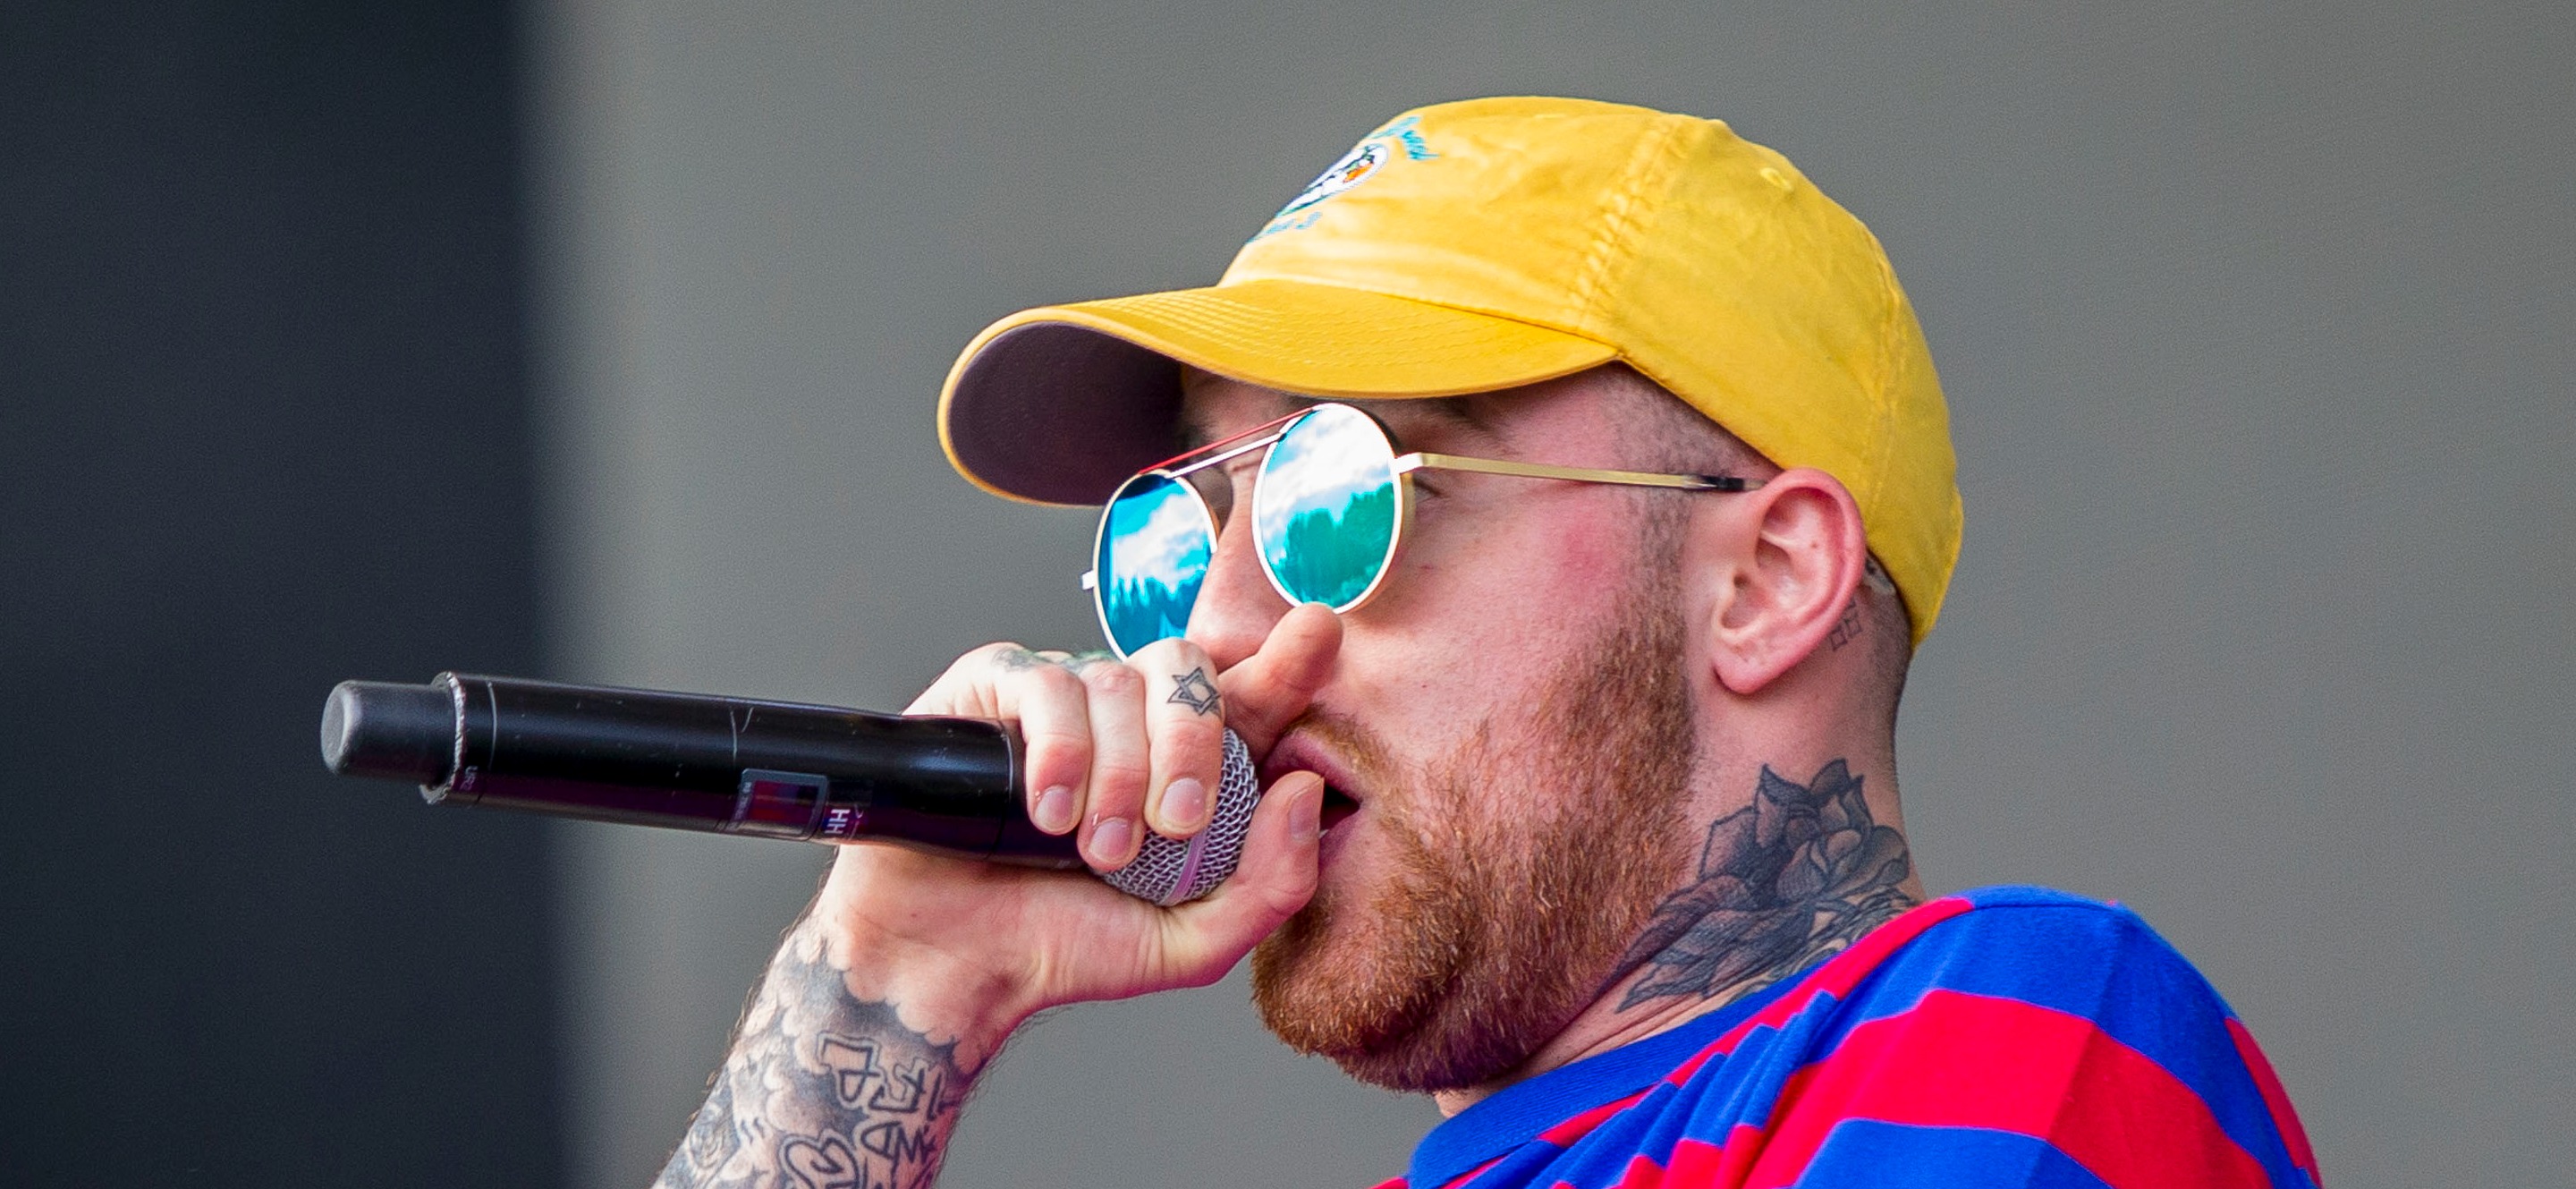 Mac Miller’s Legacy Celebrated On His 30th Birthday